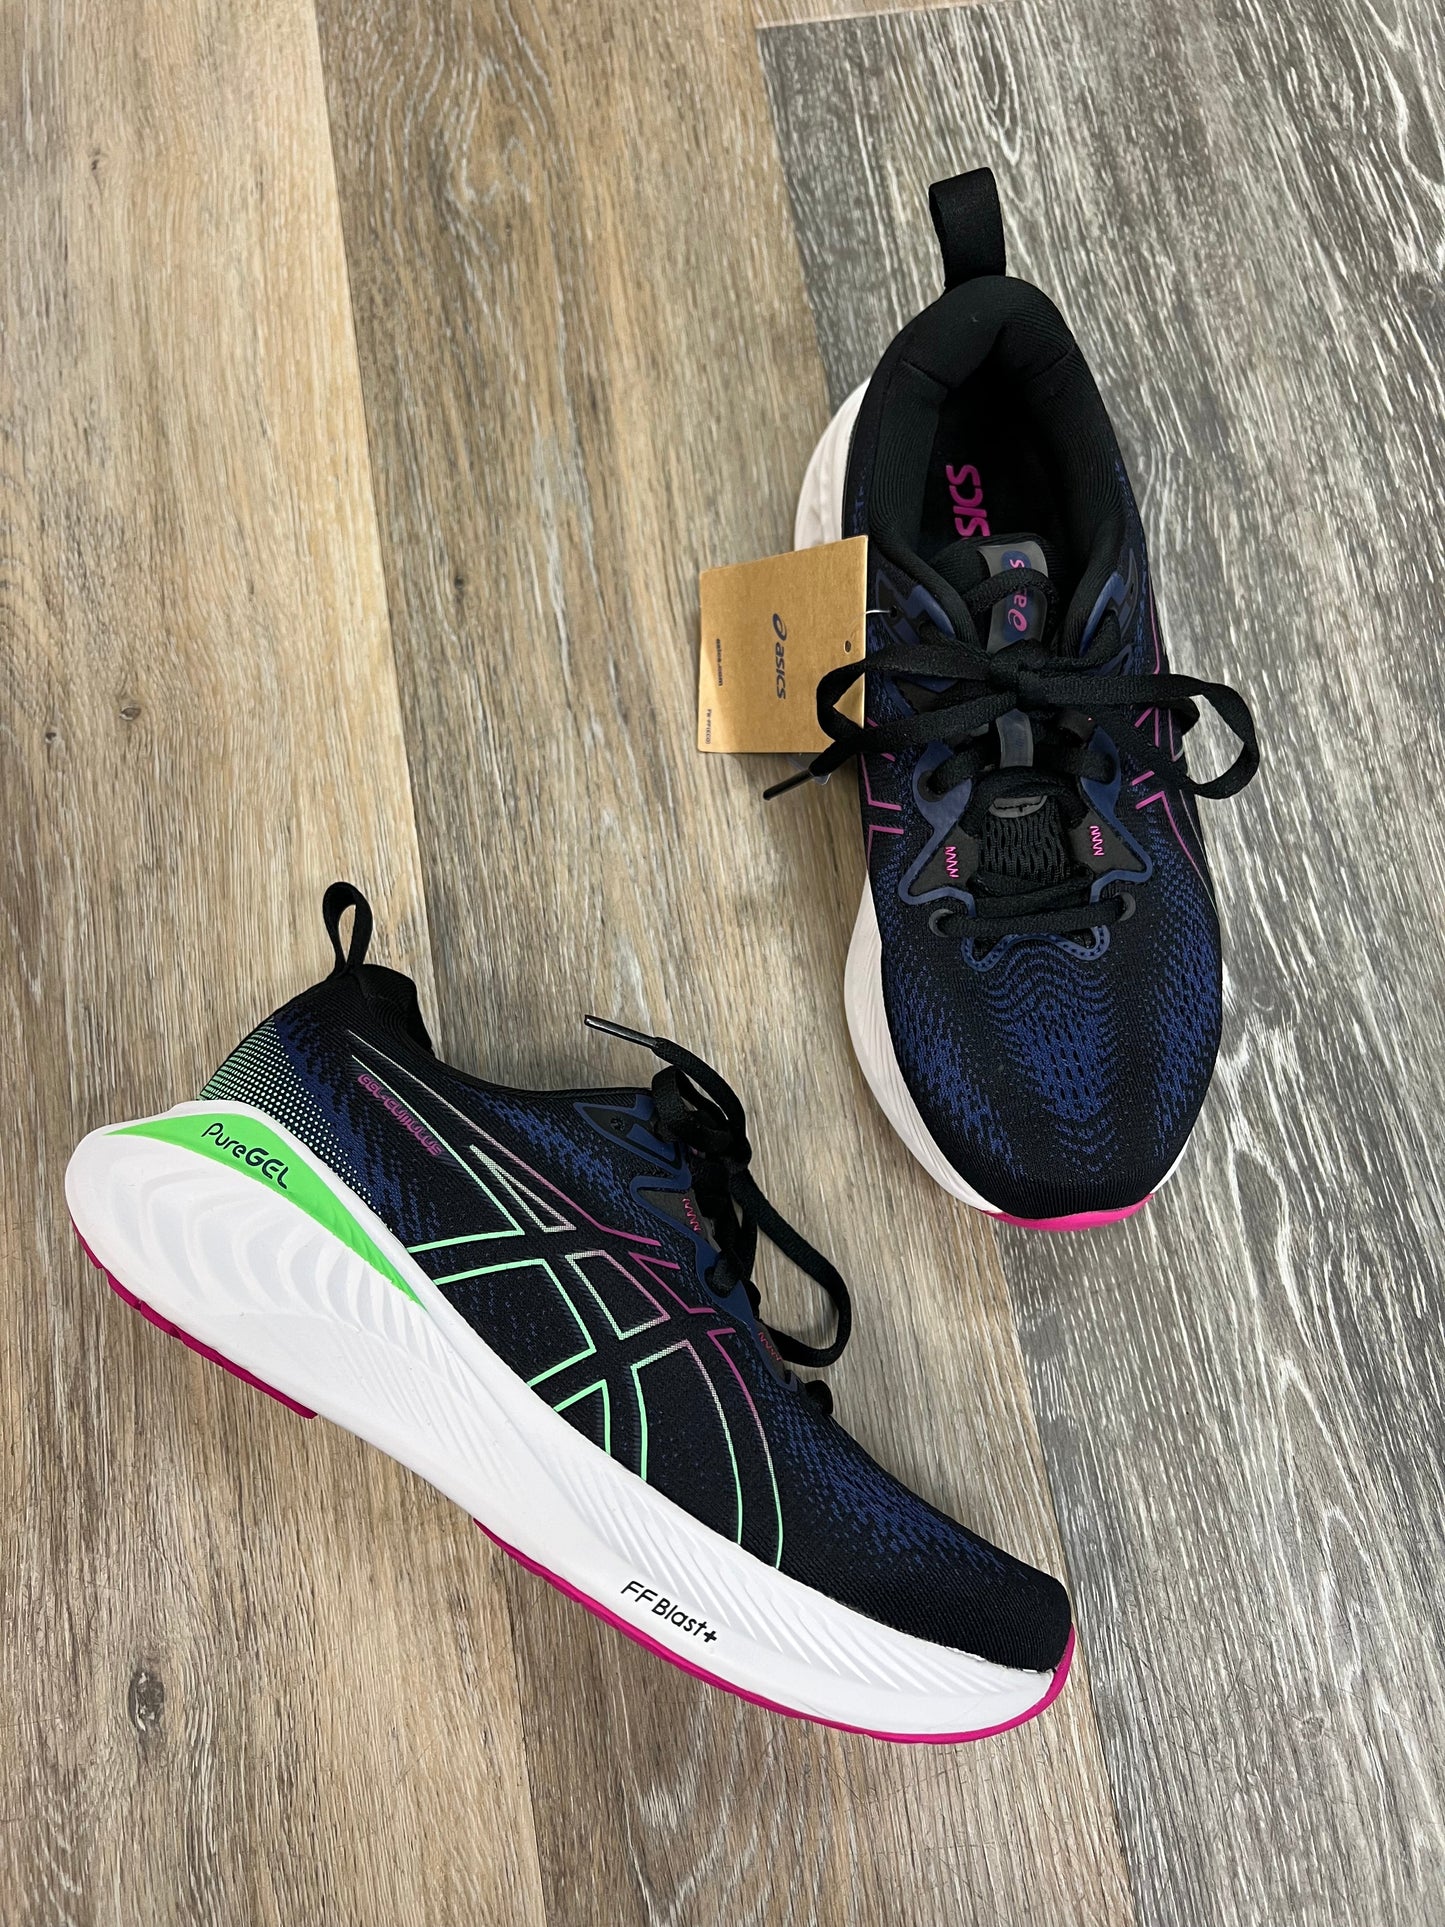 Multi-colored Shoes Athletic Asics, Size 7